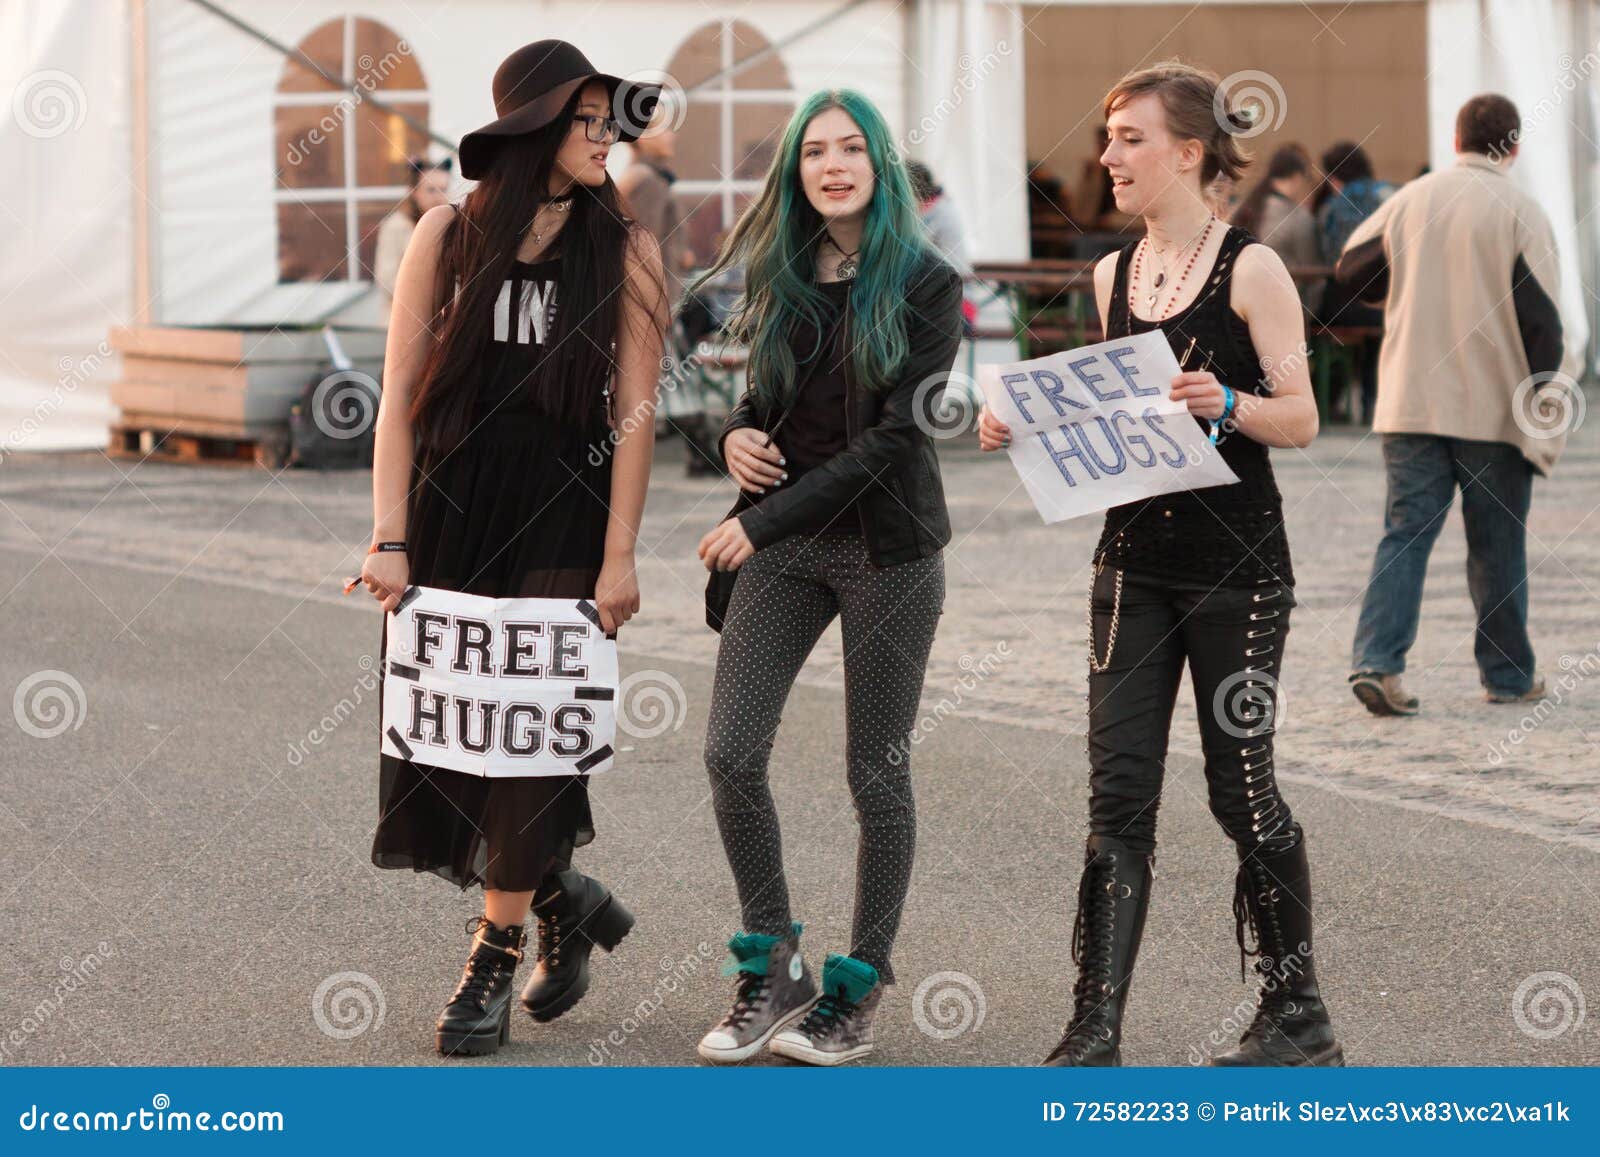 Girls Holding a Sign Free Hugs at Animefest Editorial Stock Photo - Image  of czech, japanese: 72582233